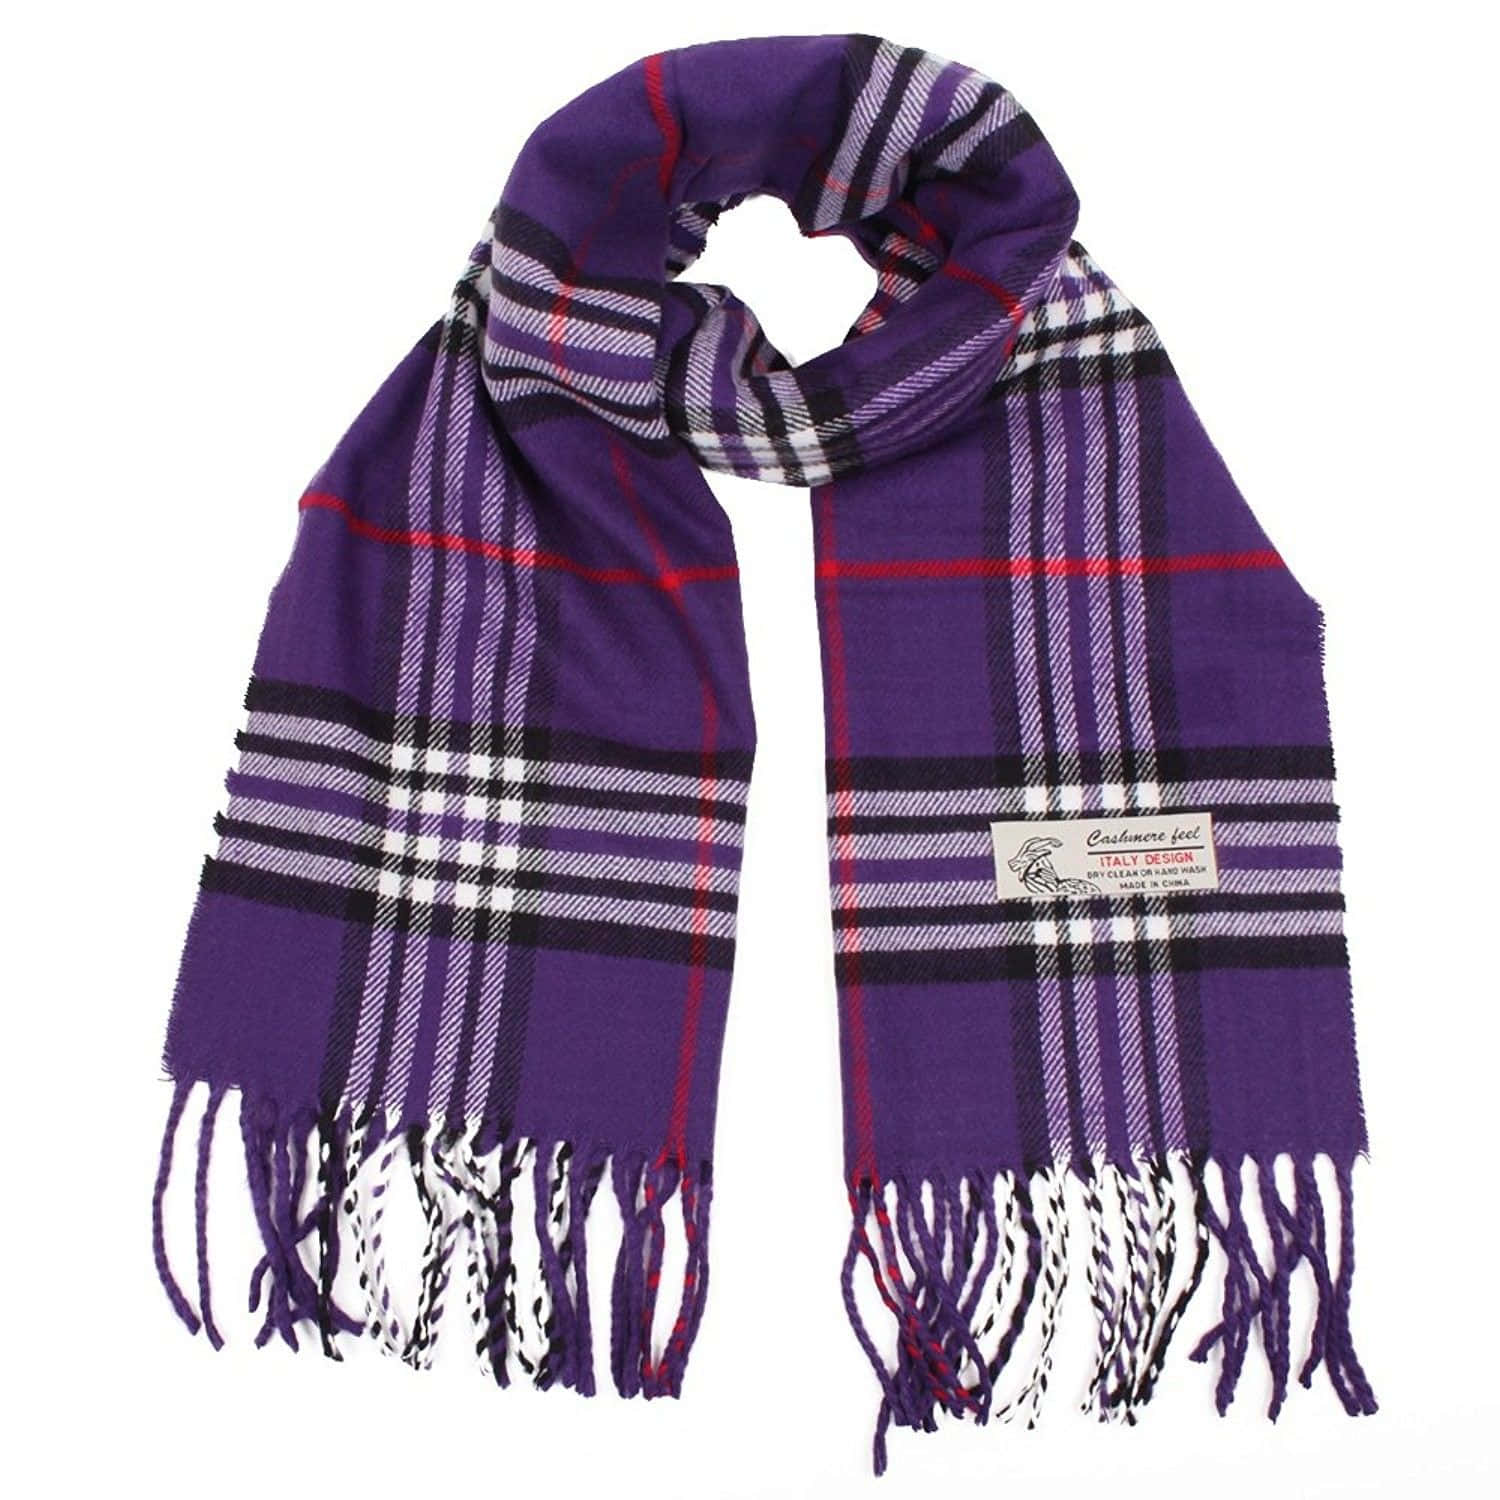 Add a touch of softness and beauty with a Purple Scarf Wallpaper